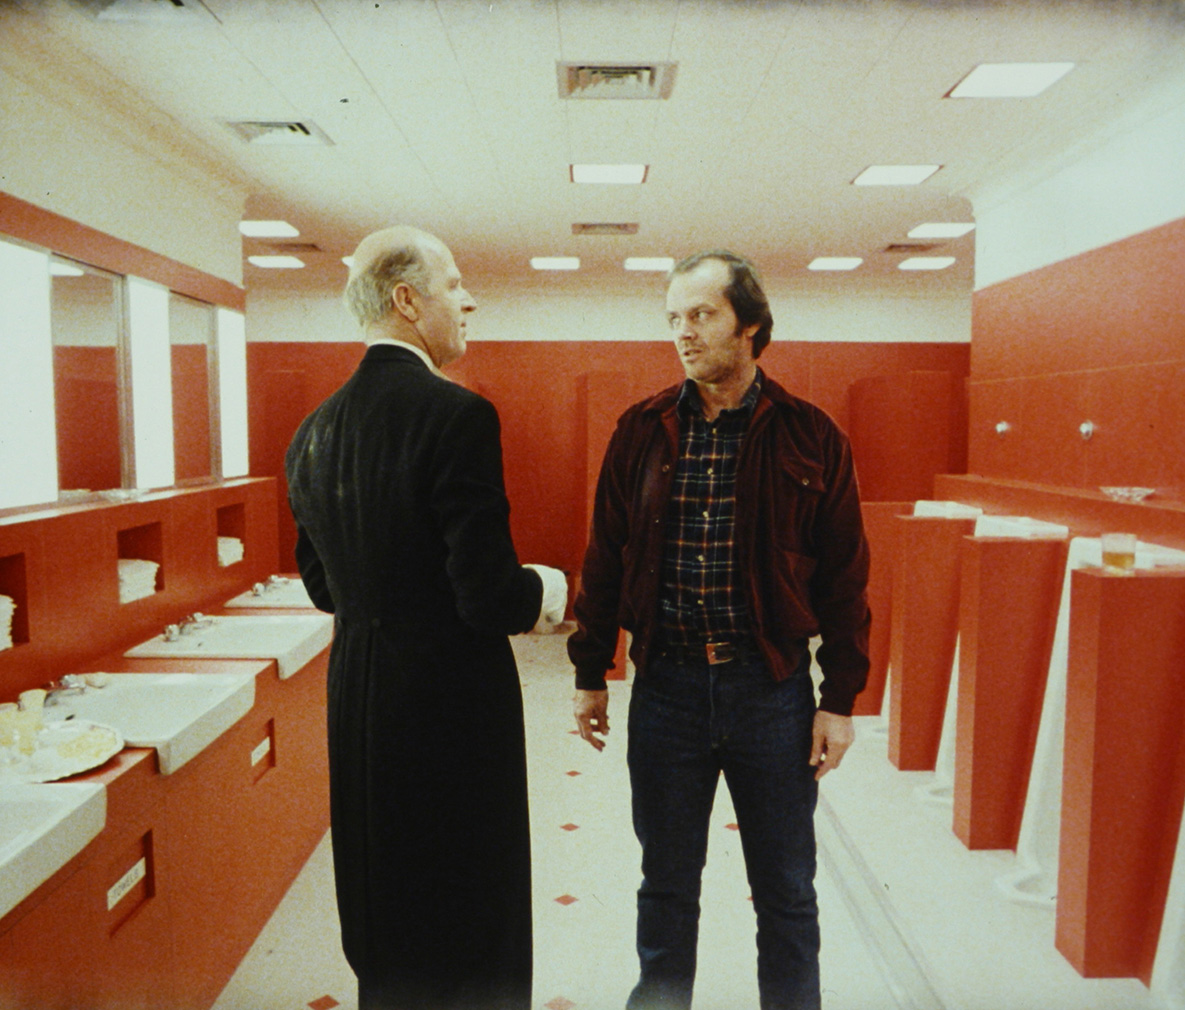 Bathroom set from <em>The Shining</em> (co) The Stanley Kubrick Archive